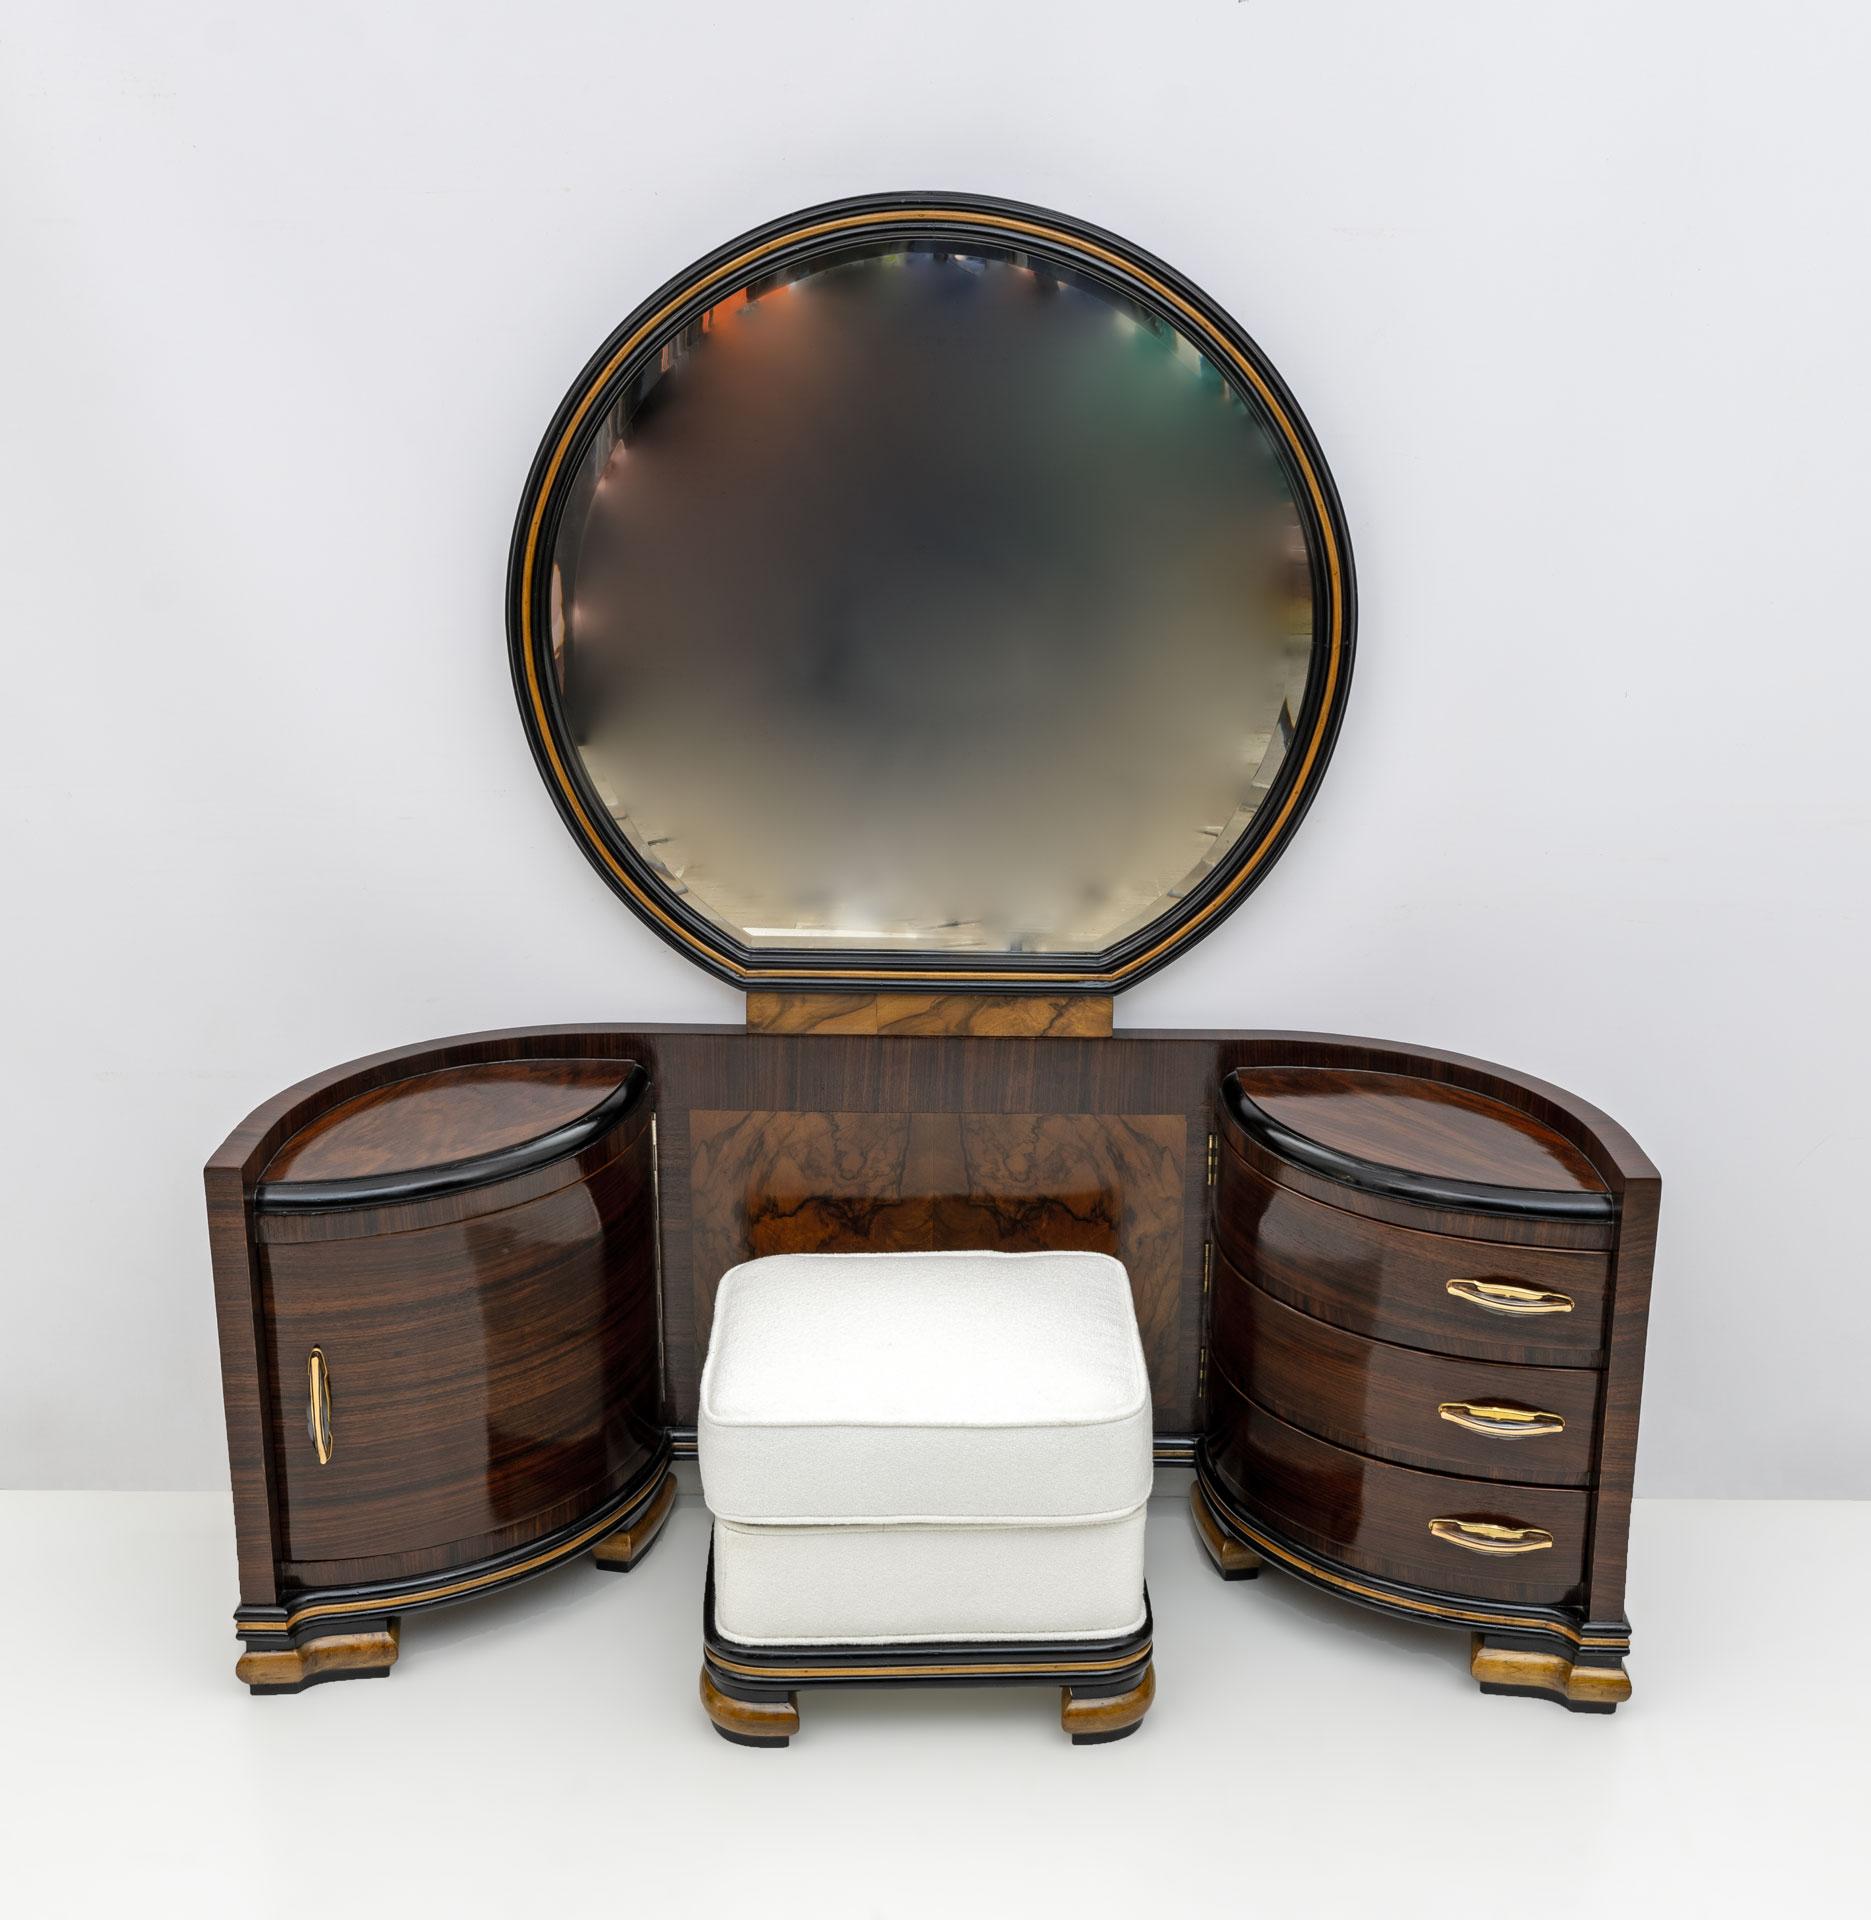 Beautiful Art Deco dressing table produced by the historic Italian company from Brianza, Industria Mobili, Fratelli Mascheroni, with its pouf in walnut and ebonized wood. In the center, a large circular mirror is surrounded by two side containers,